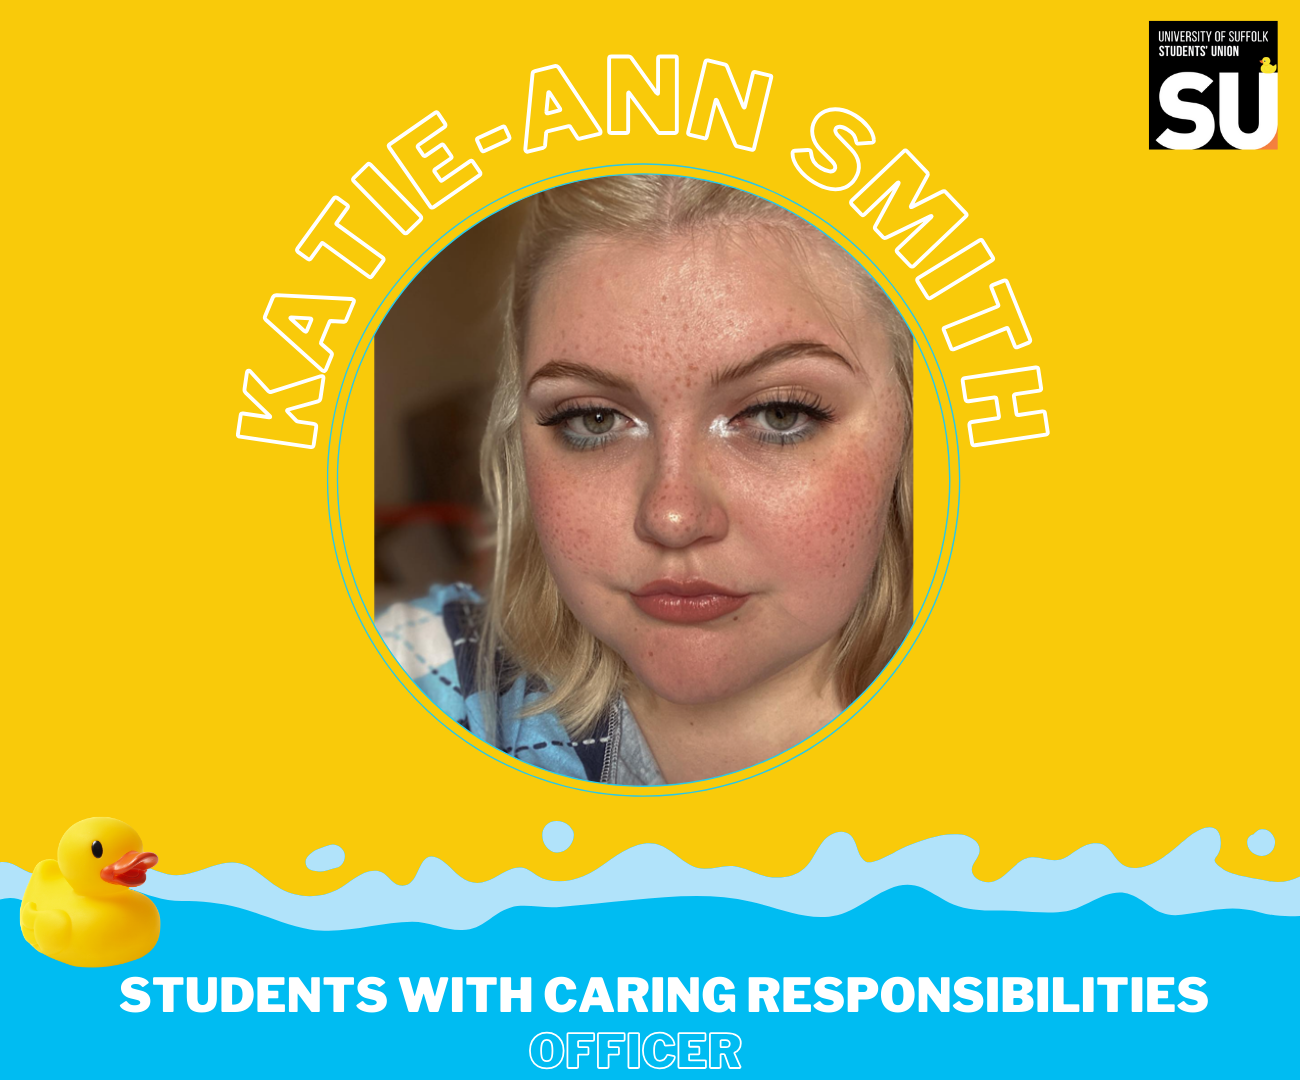 Katie-Ann students with caring responsibilities officer